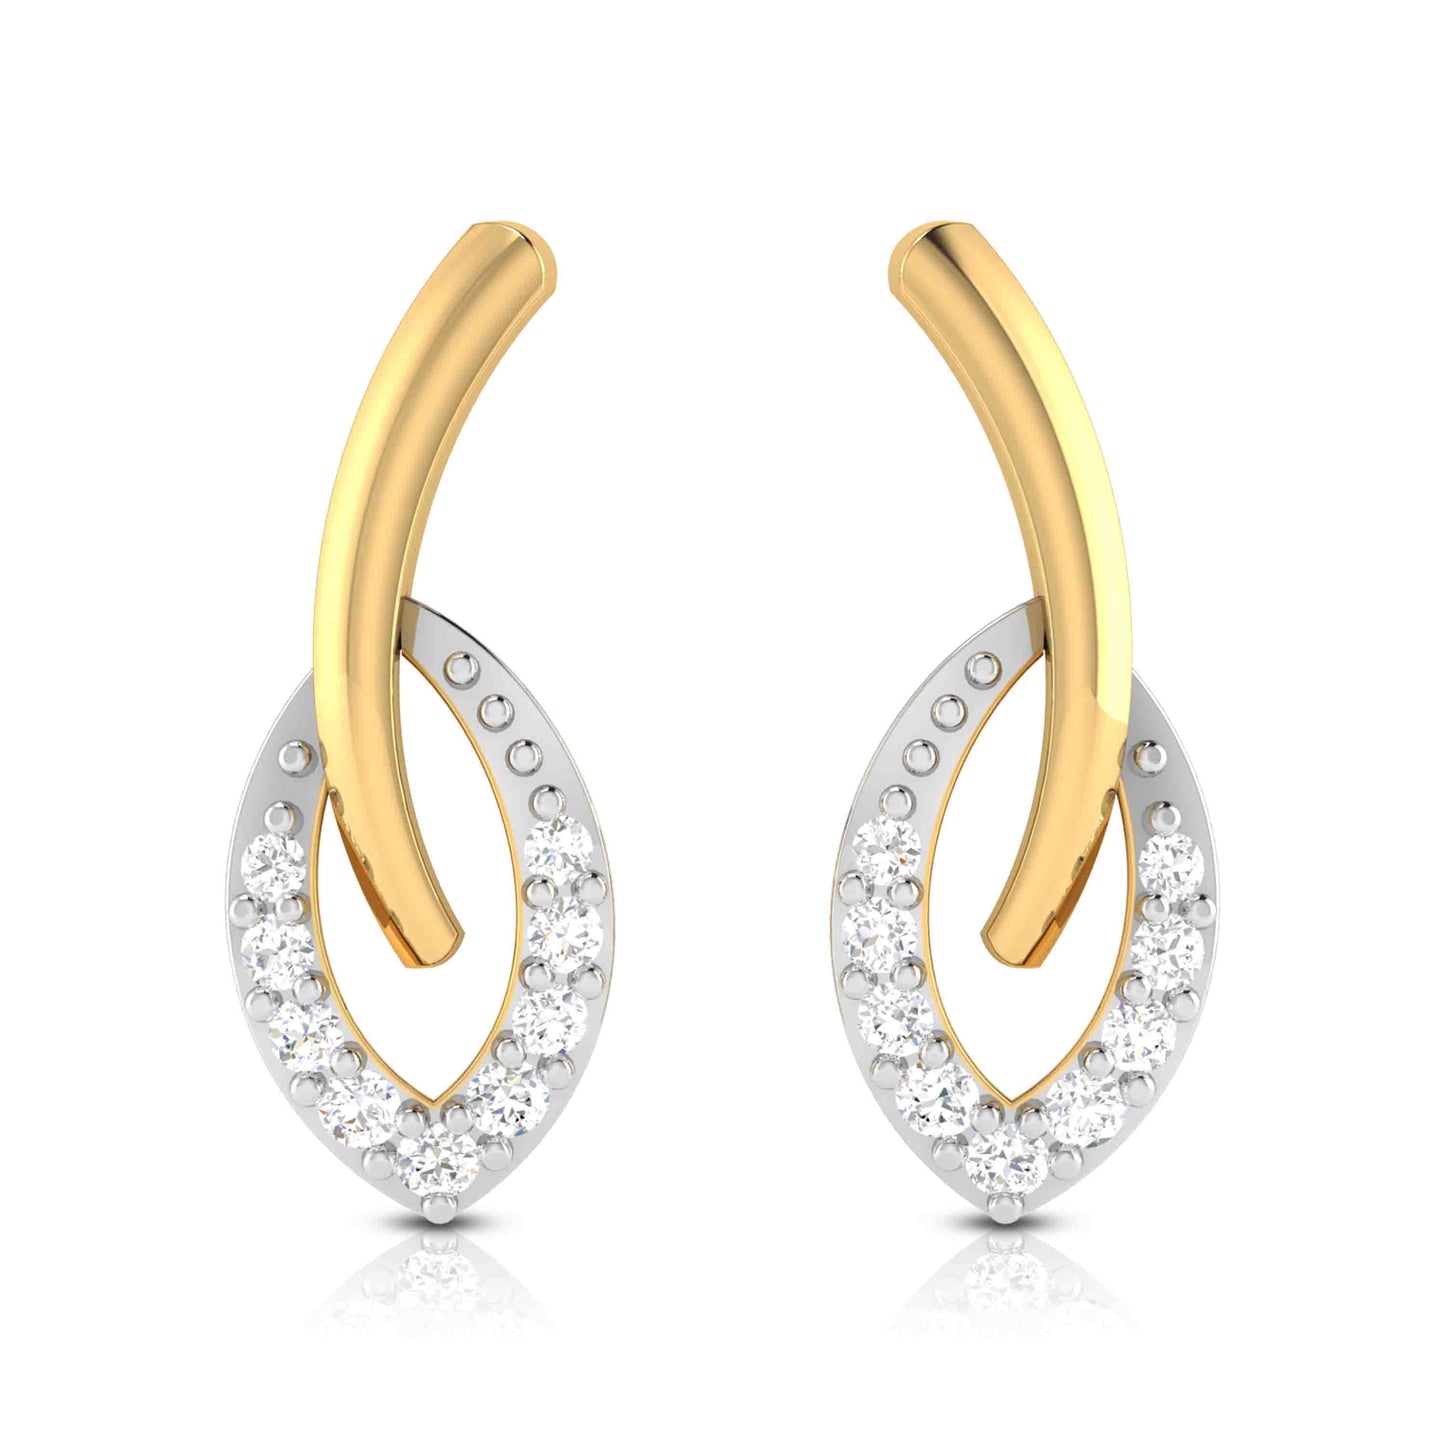 Load image into Gallery viewer, Latest earrings design Sprightly Lab Grown Diamond Earrings Fiona Diamonds
